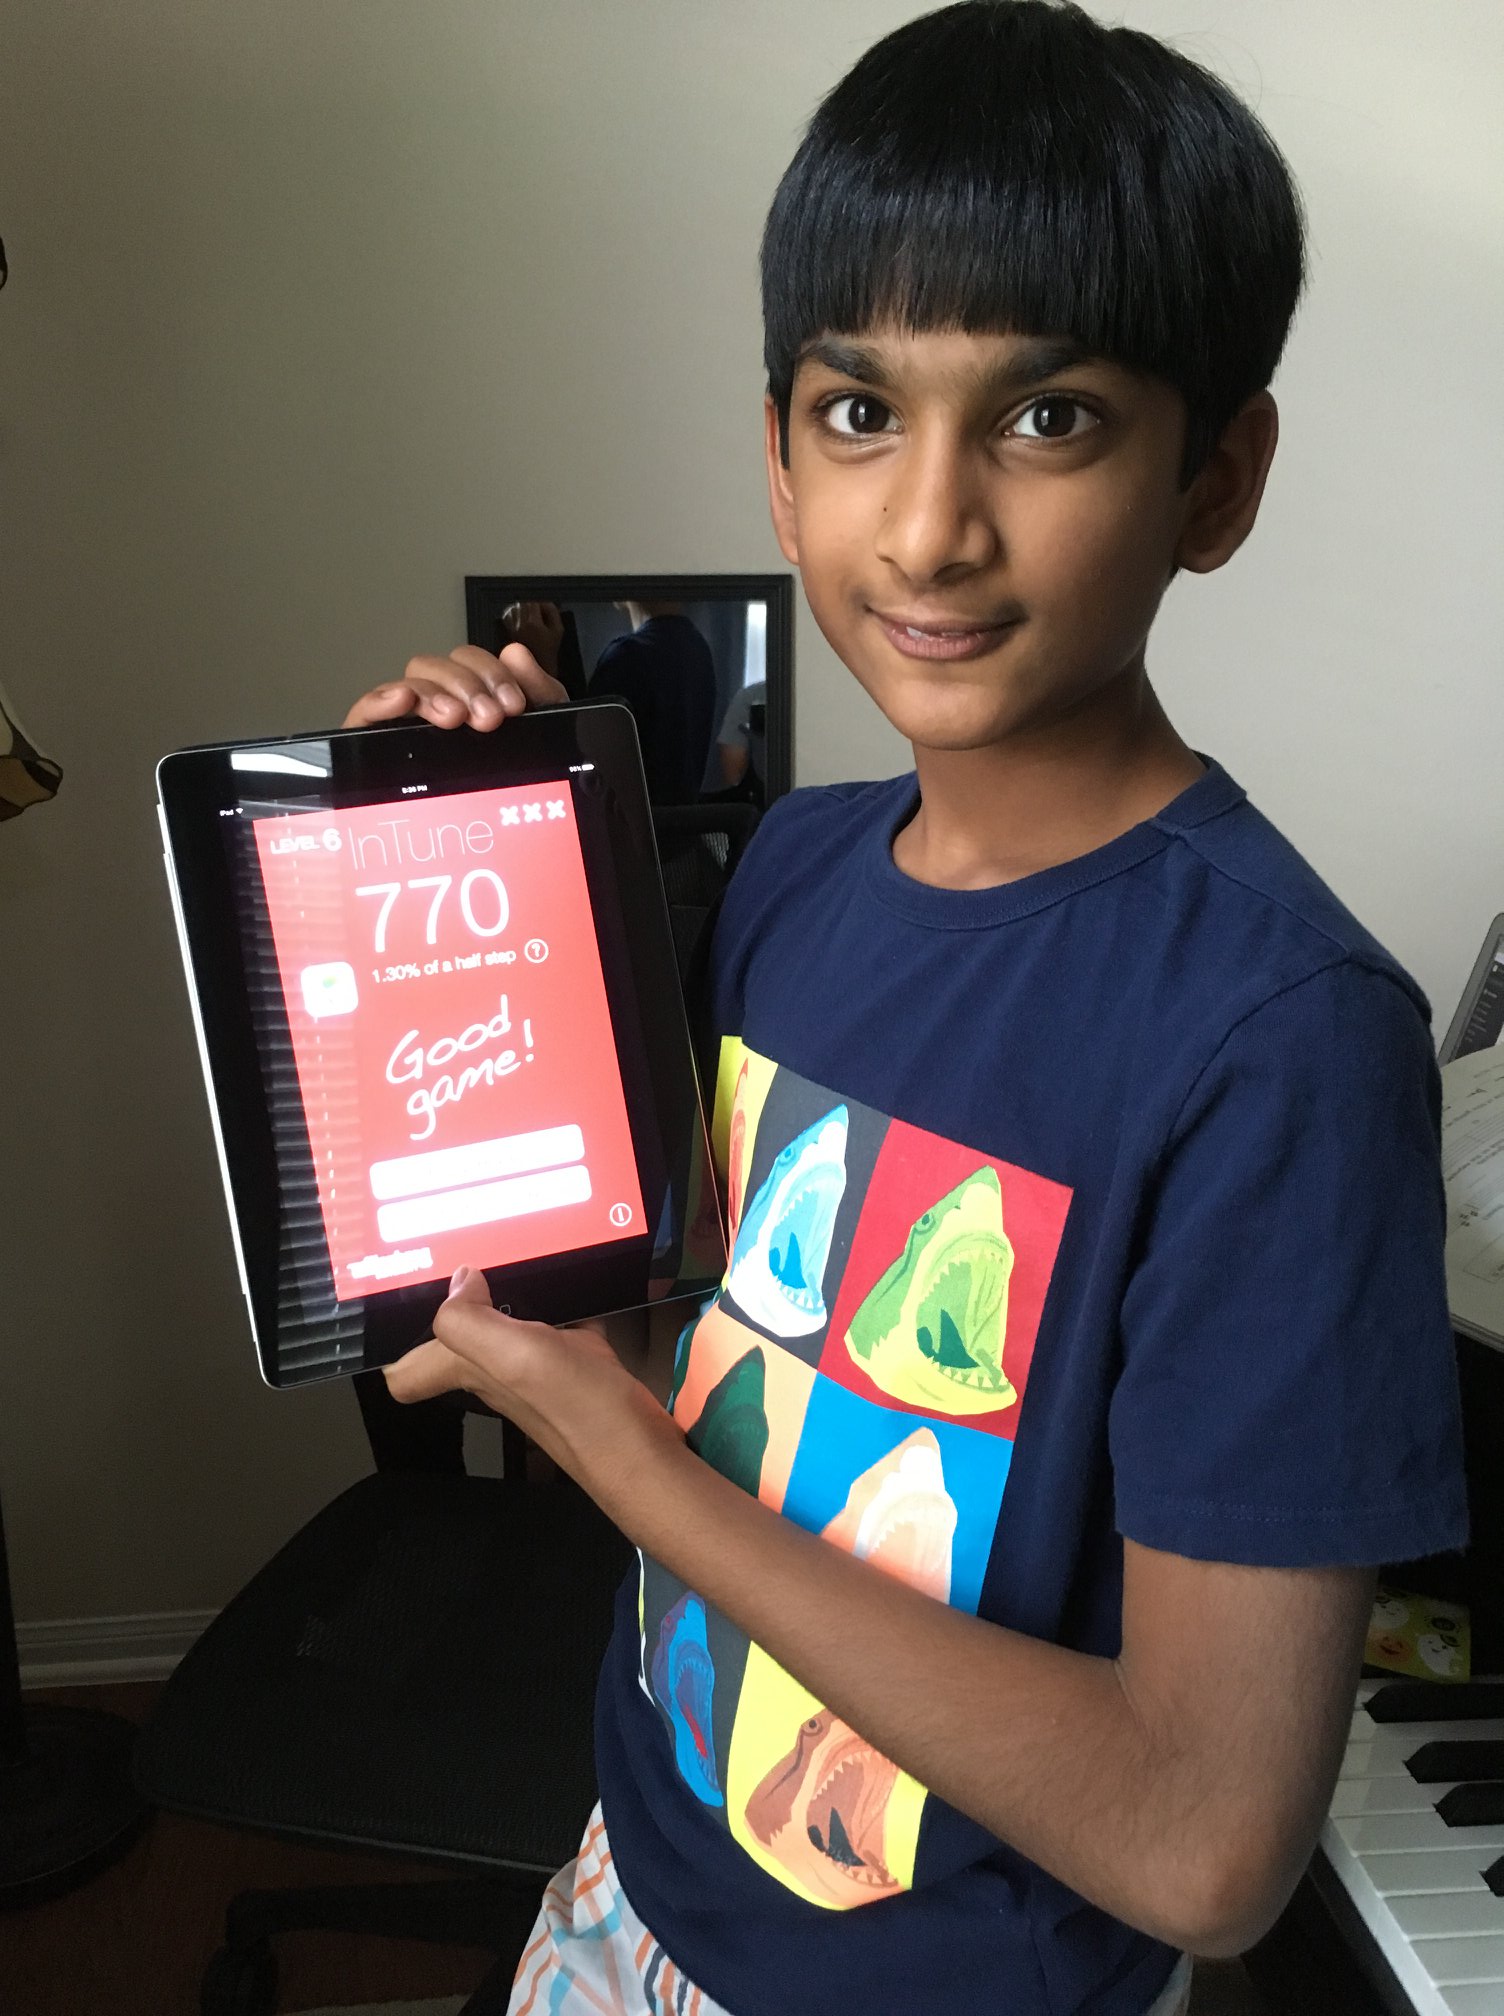 Middle school boy holds an iPad showing a high score for ear training.